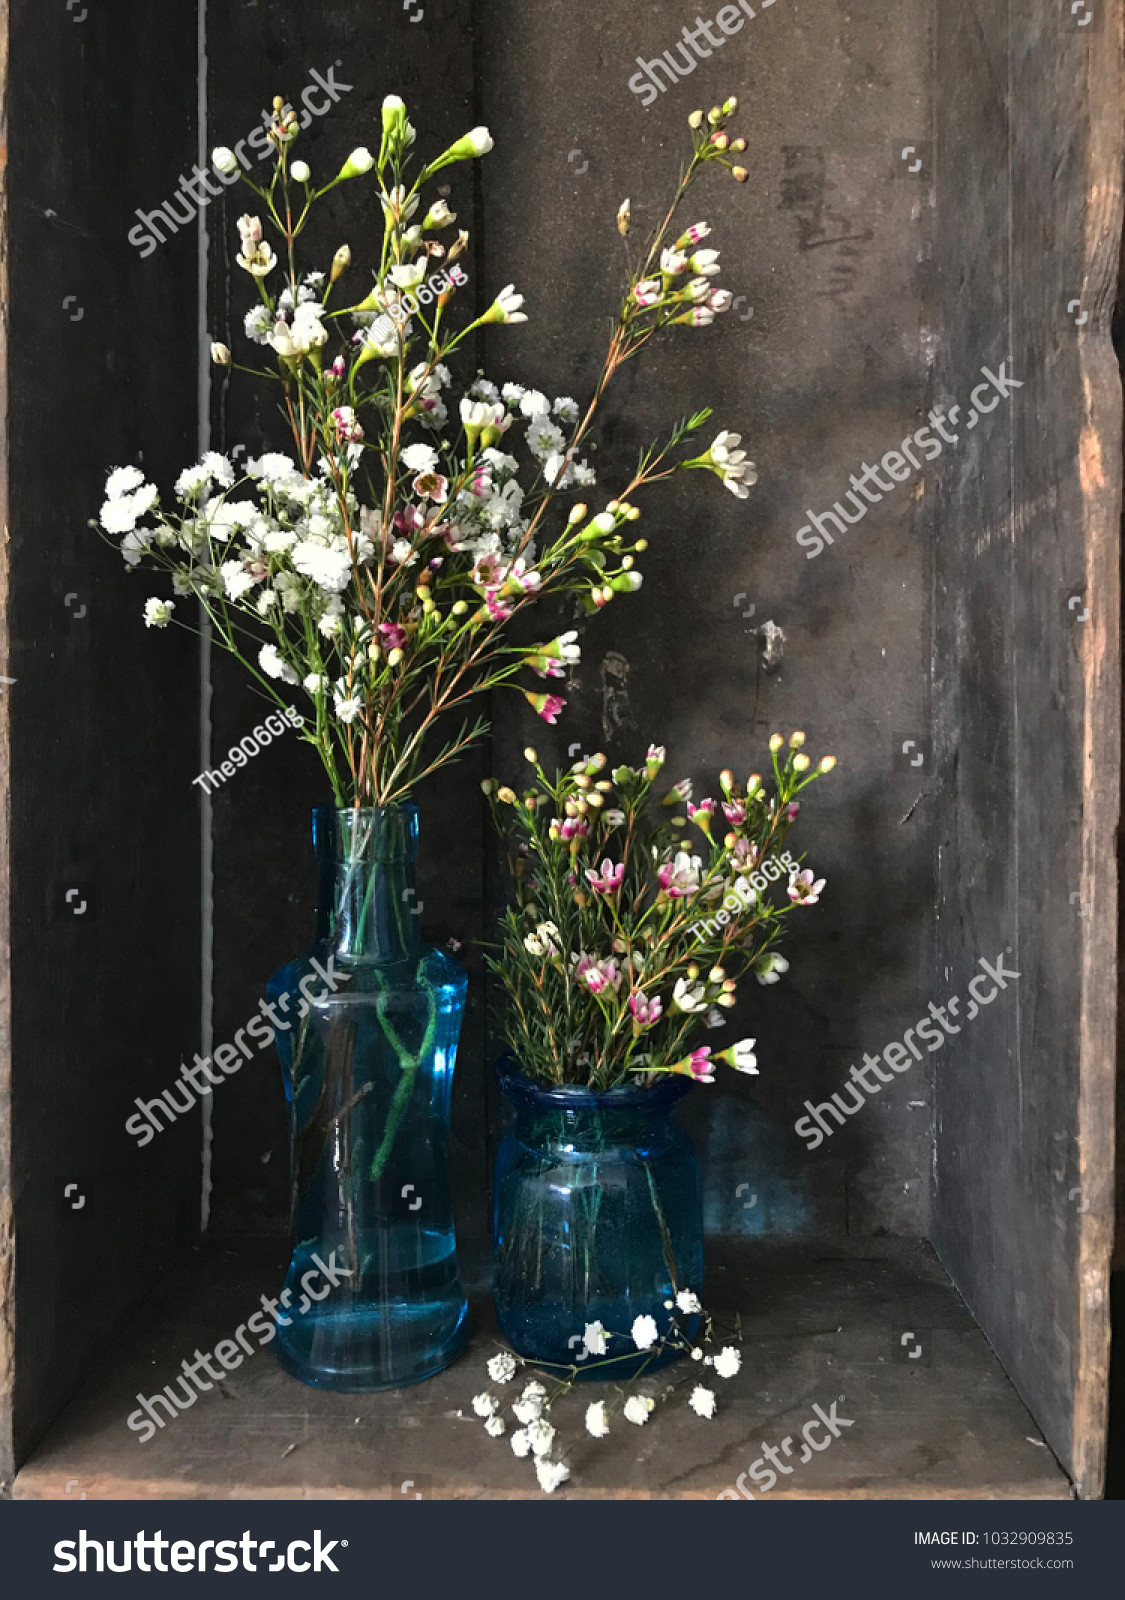 26 Cute Colored Glass Vases for Centerpieces 2024 free download colored glass vases for centerpieces of wildflowers babys breath blue glass vases stock photo edit now intended for wildflowers and babys breath in blue glass vases wood background rustic co